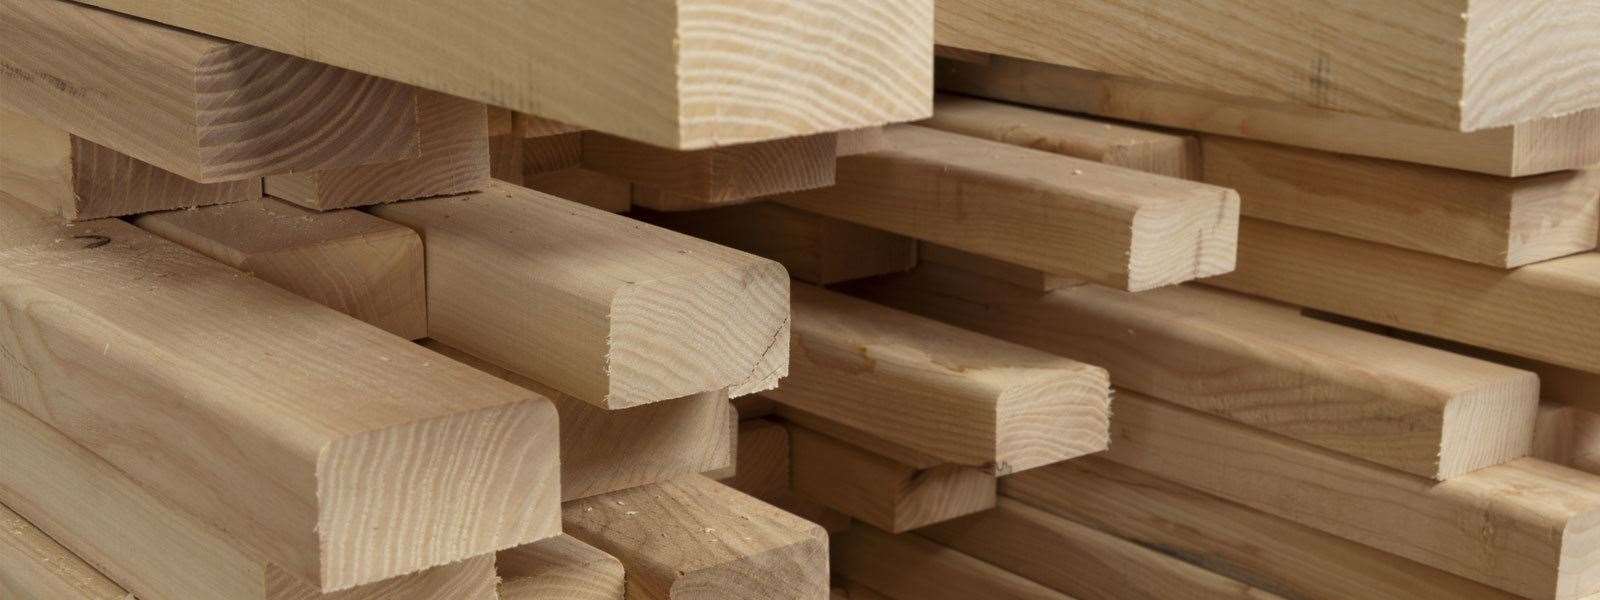 The manufacturing of timber being used as building materials produces almost zero carbon emissions.